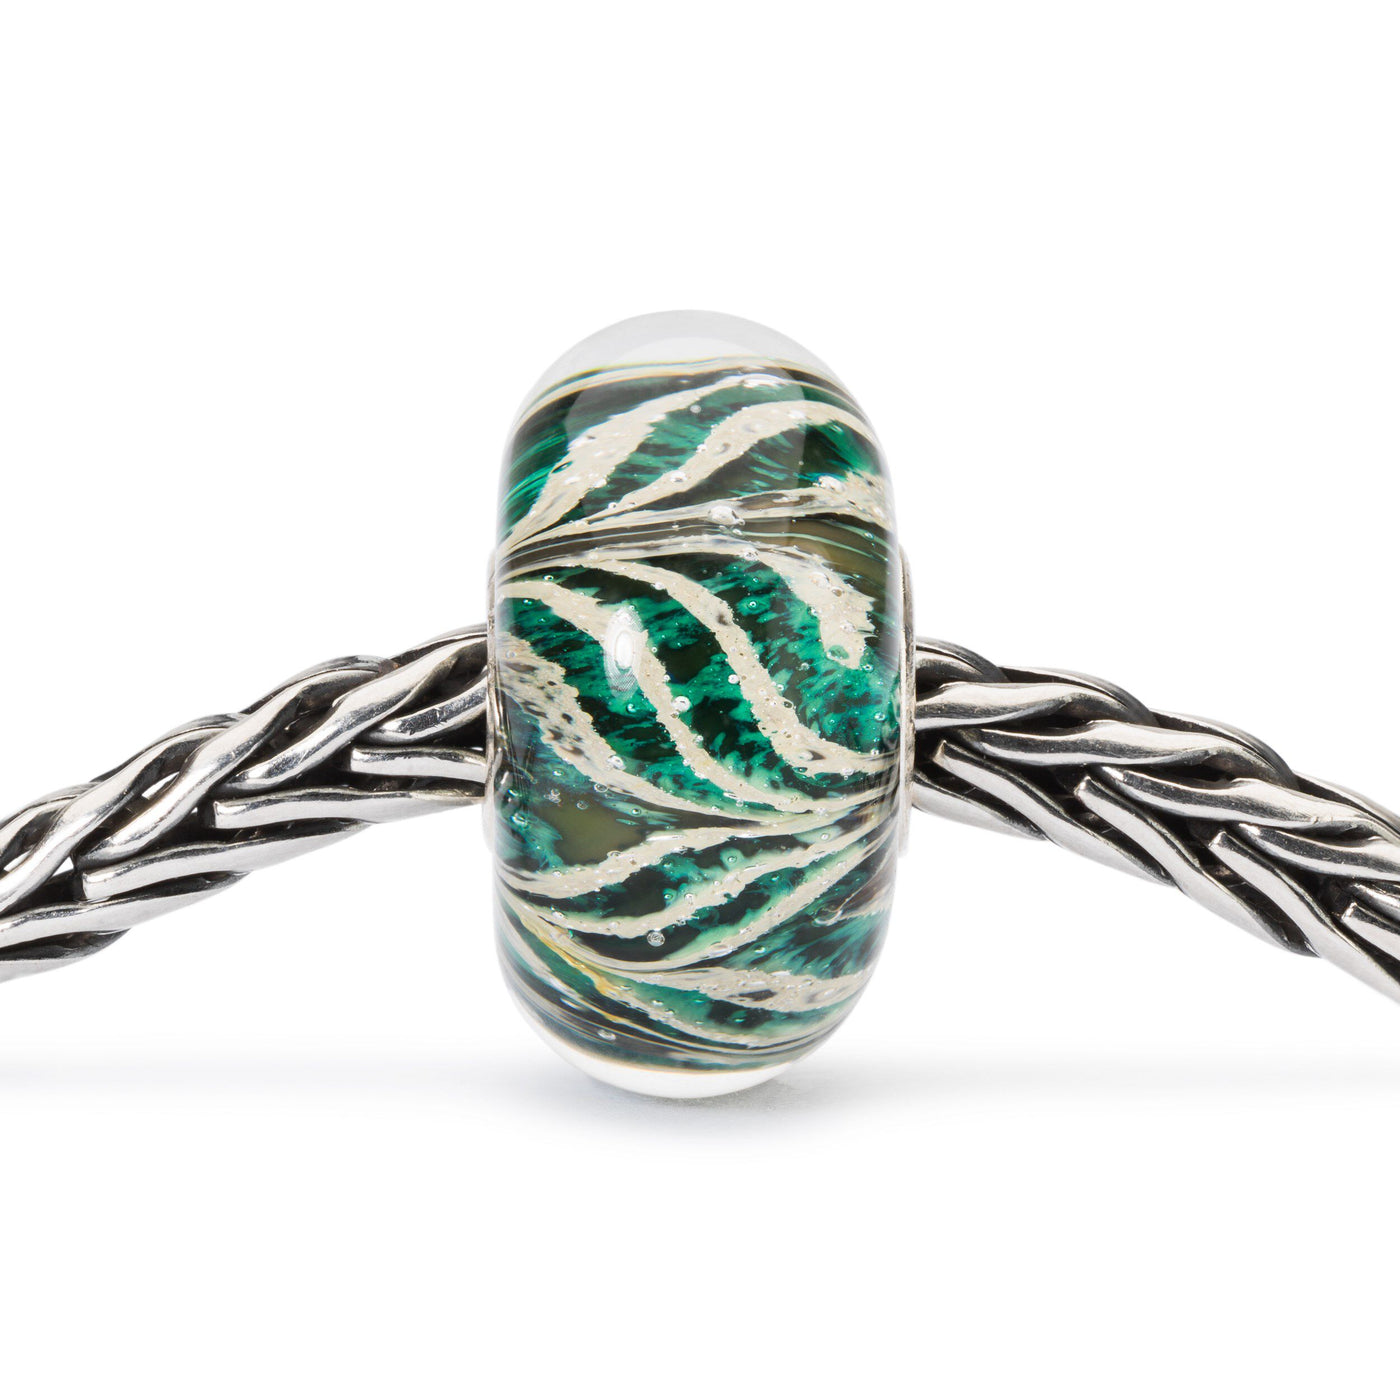 Roots of Spirit - Trollbeads Canada